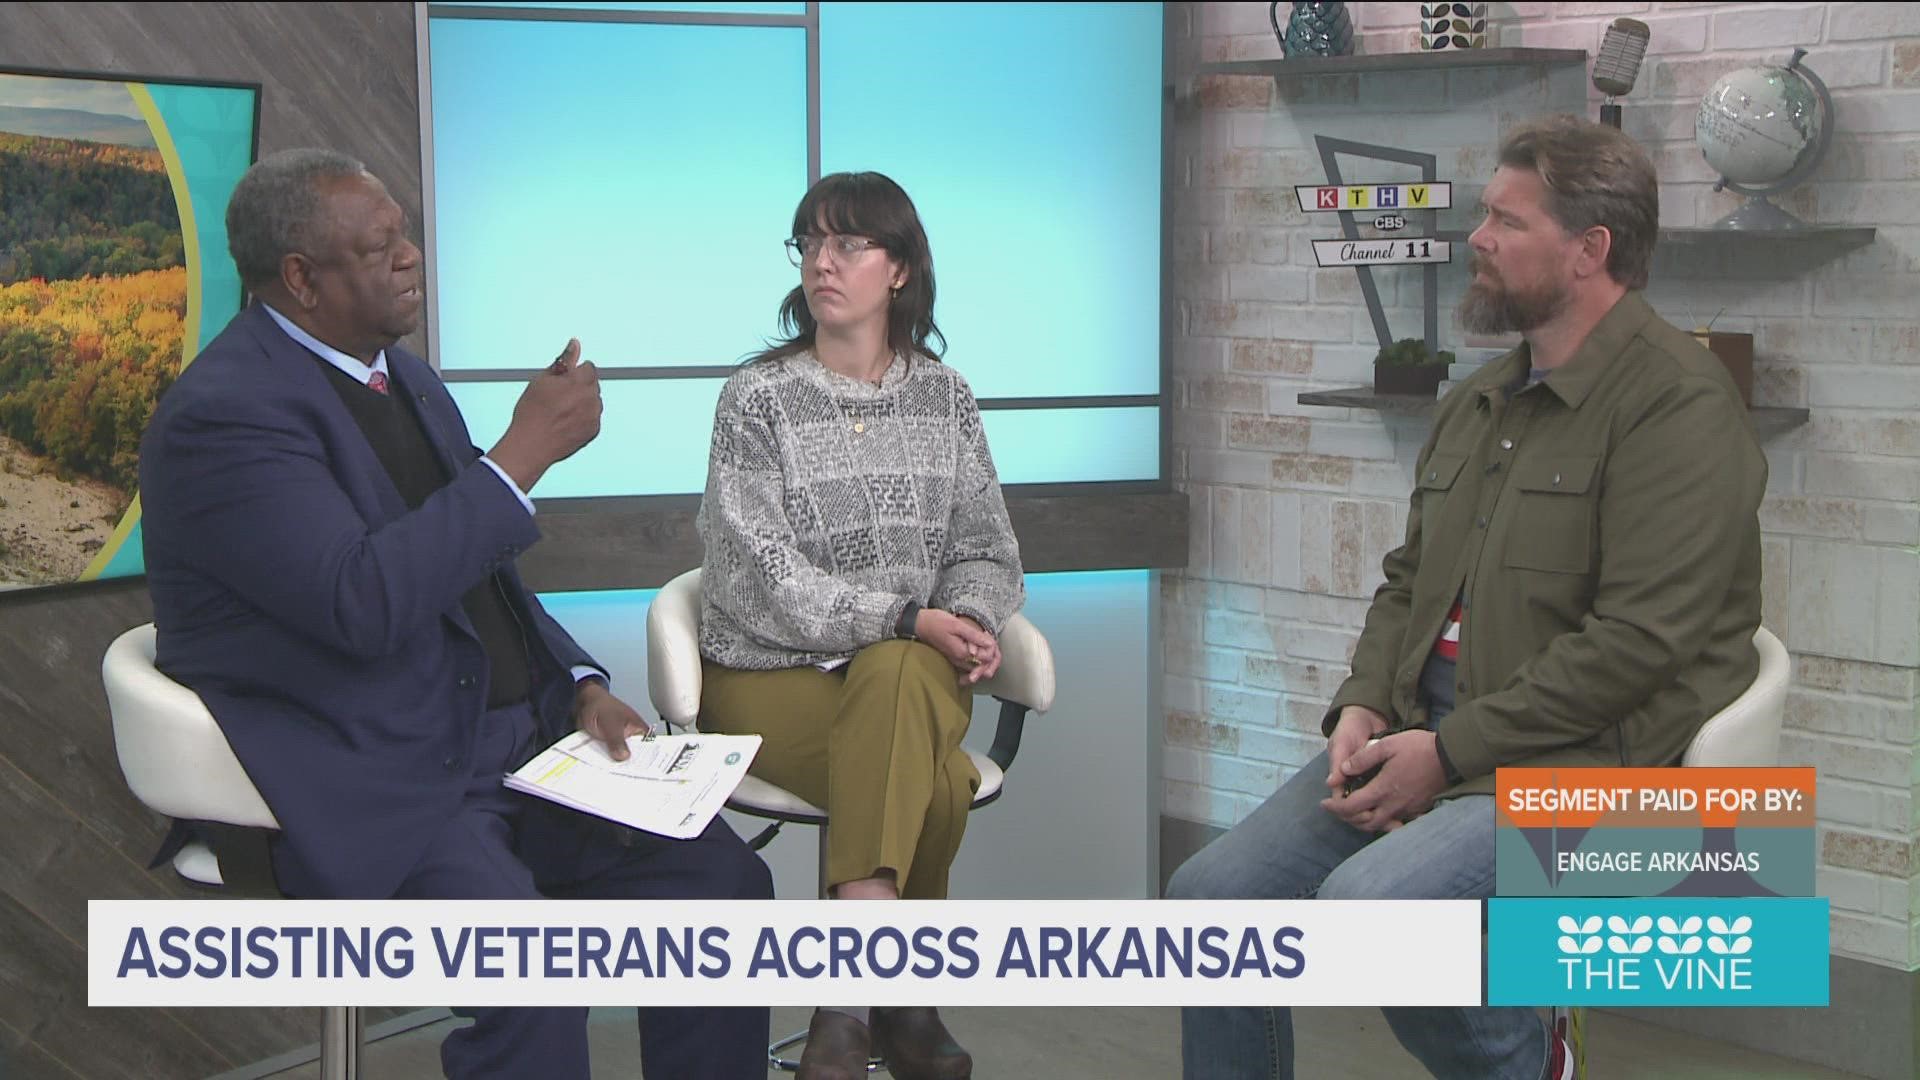 SEGMENT PAID FOR BY: Engage Arkansas. Learn more at engagearkansas.org/veterans!